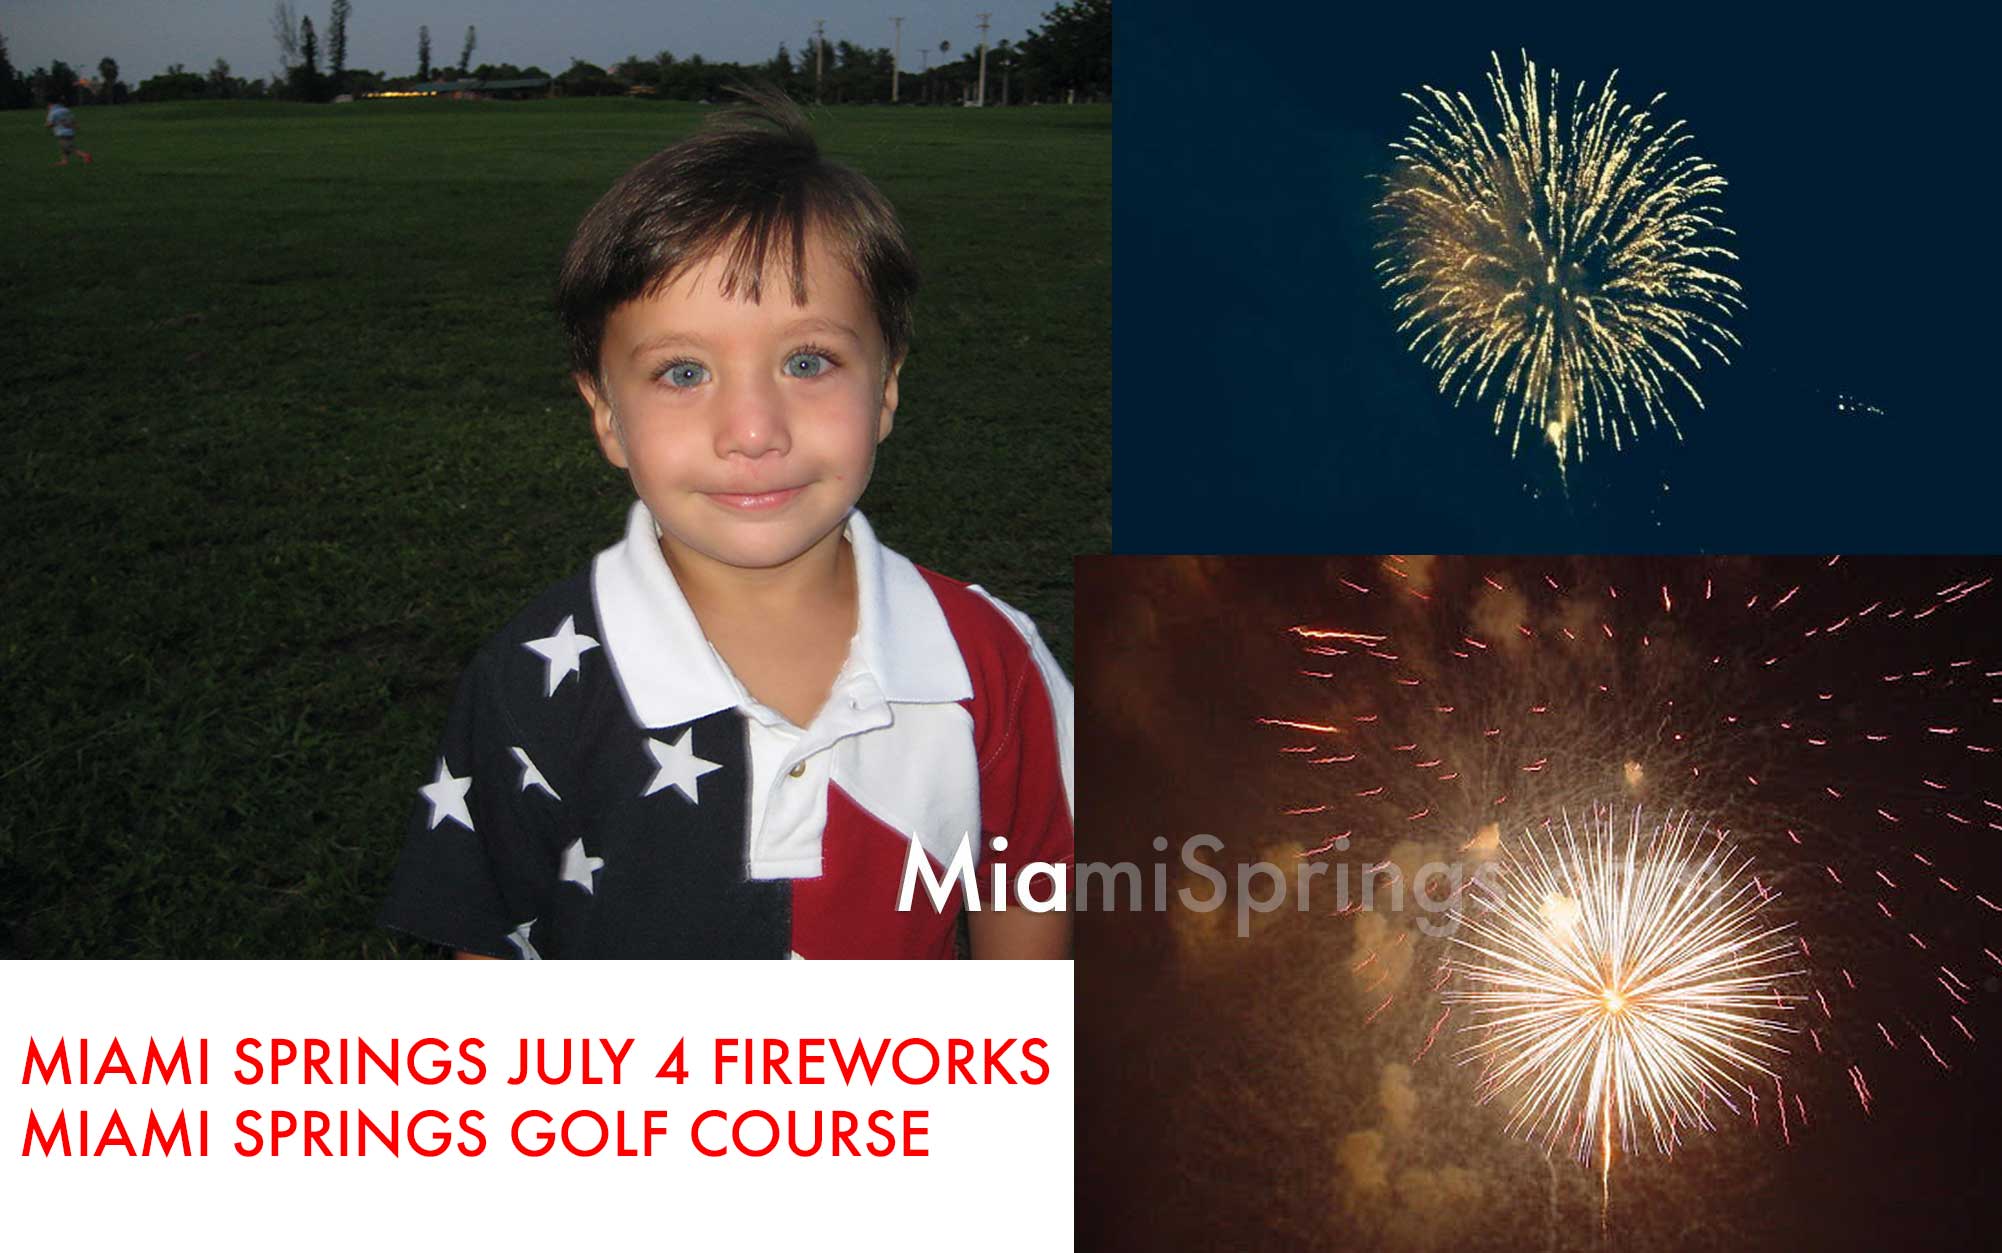 Miami Springs Fireworks at the Miami Springs Golf Course